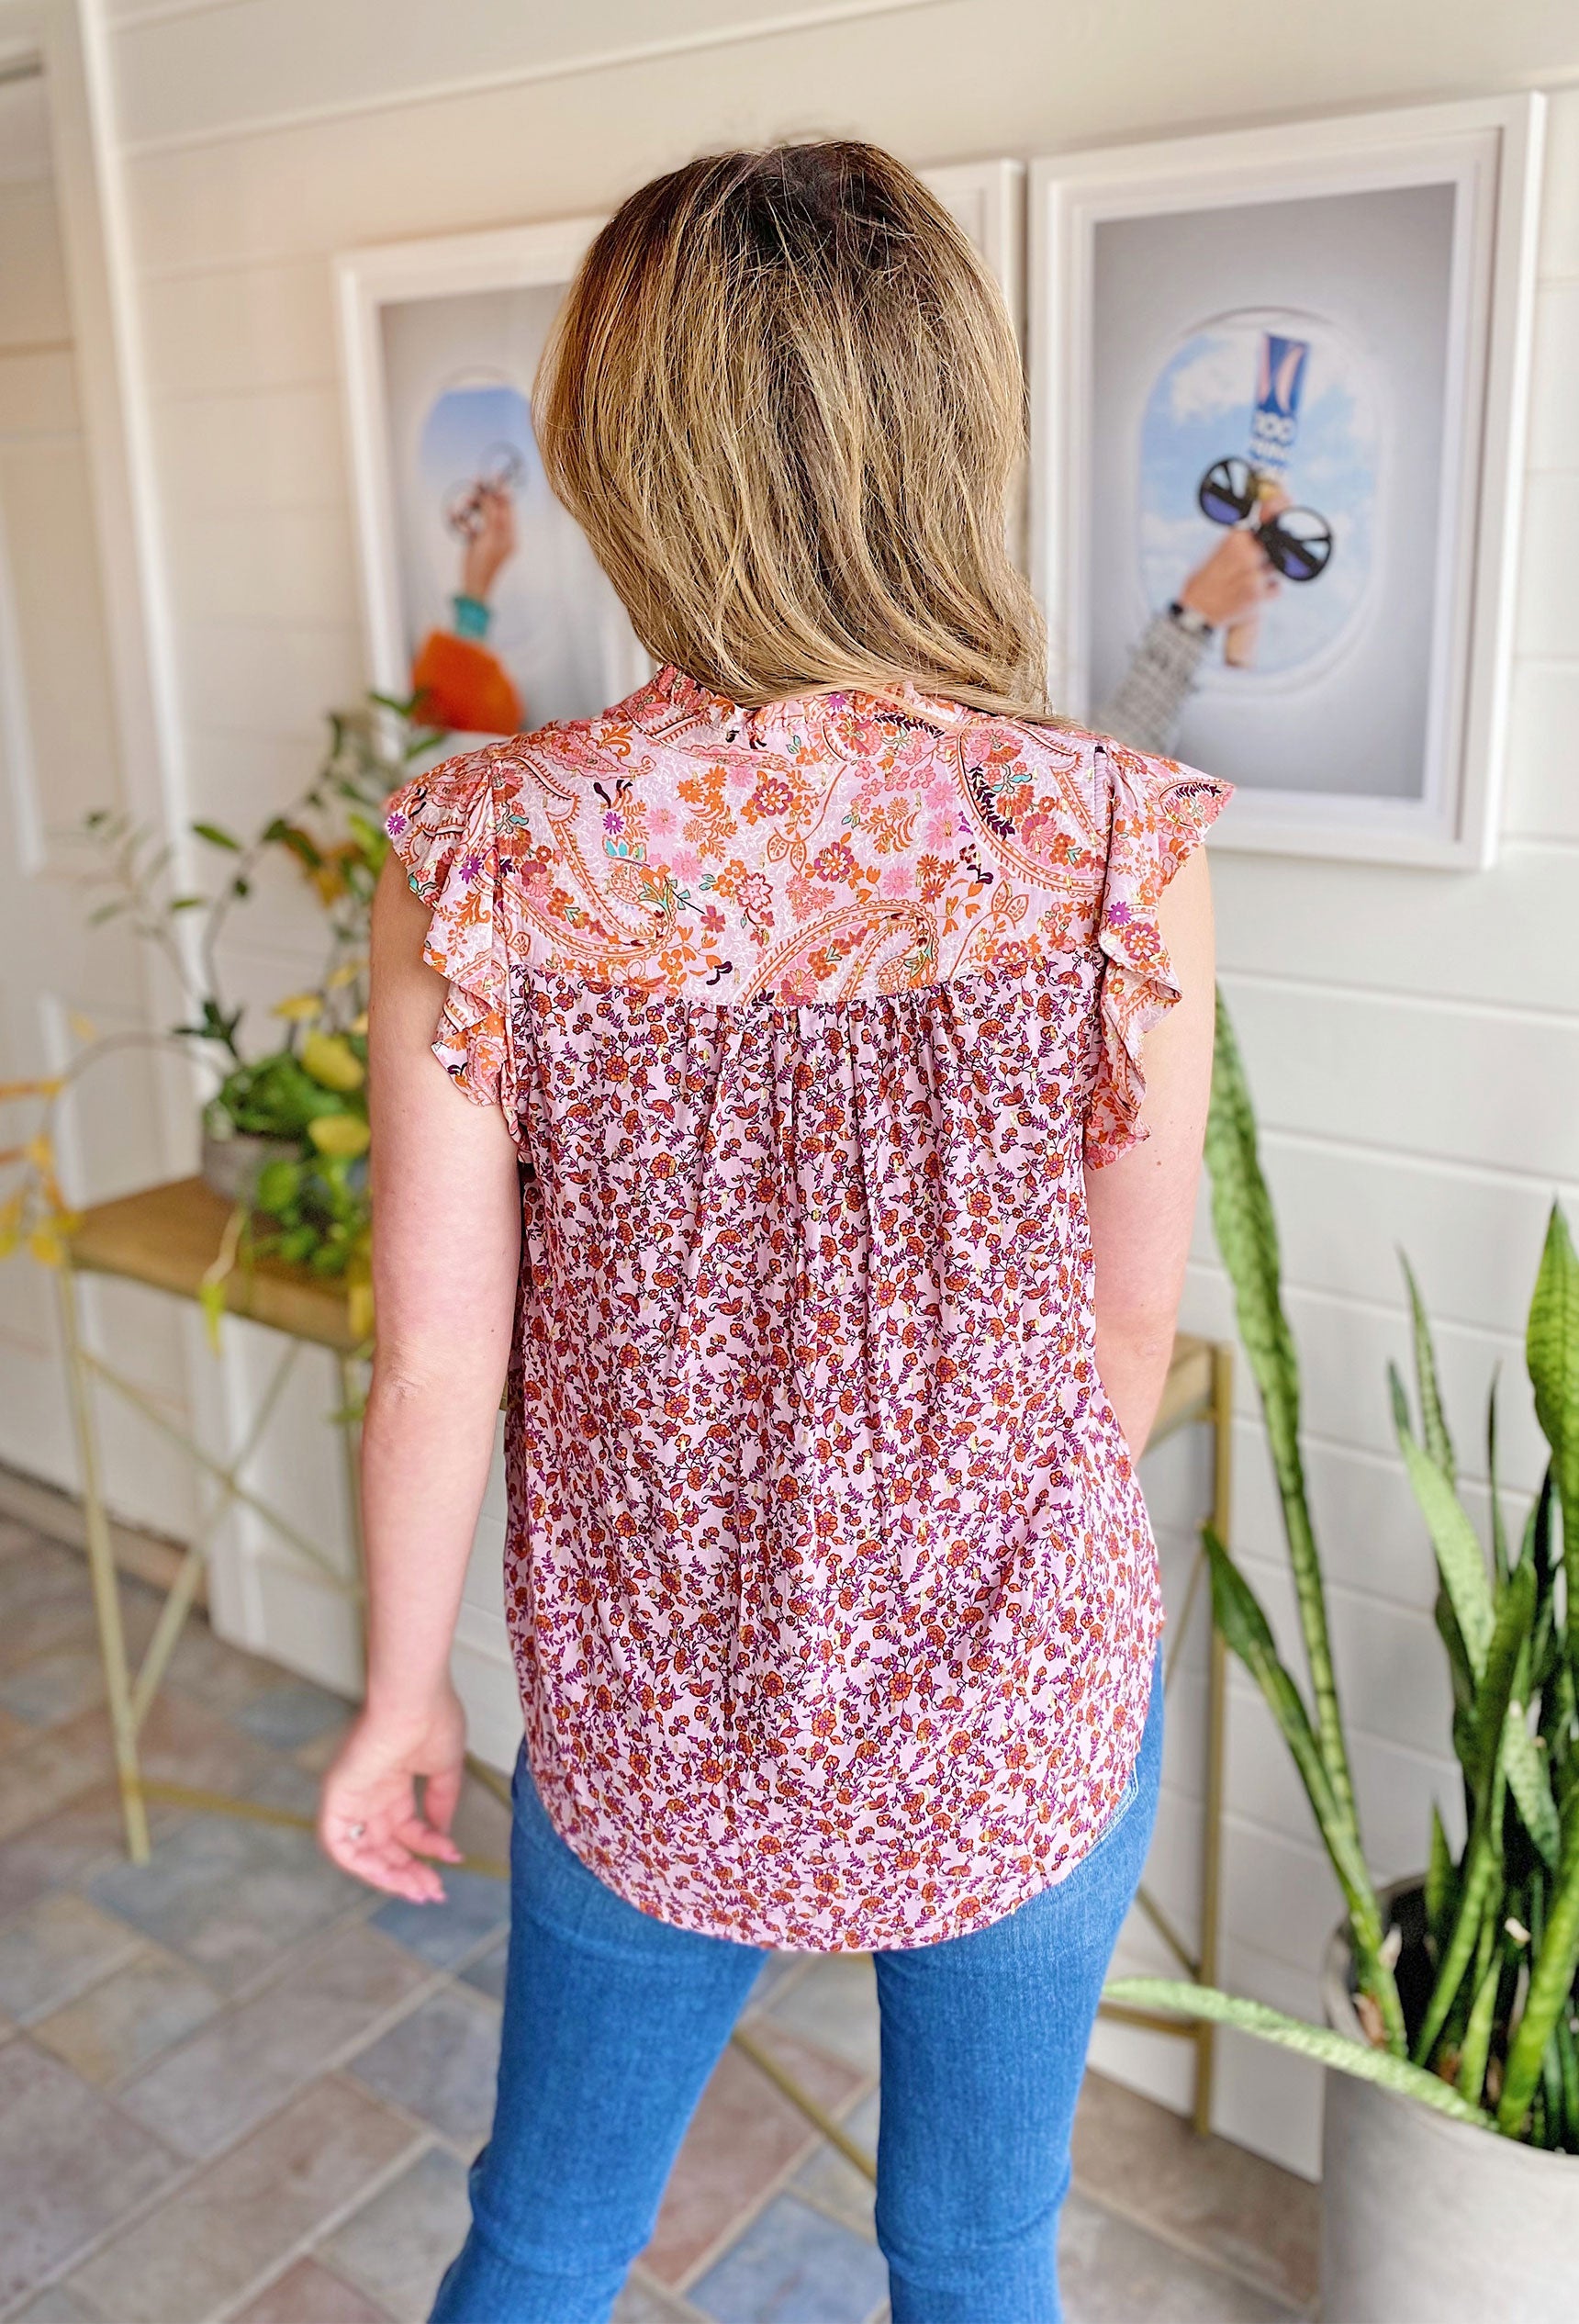 Summertime Blooms Blouse, purple blouse, small floral detailing, metallic gold flakes threaded in the blouse, lined v-neckline